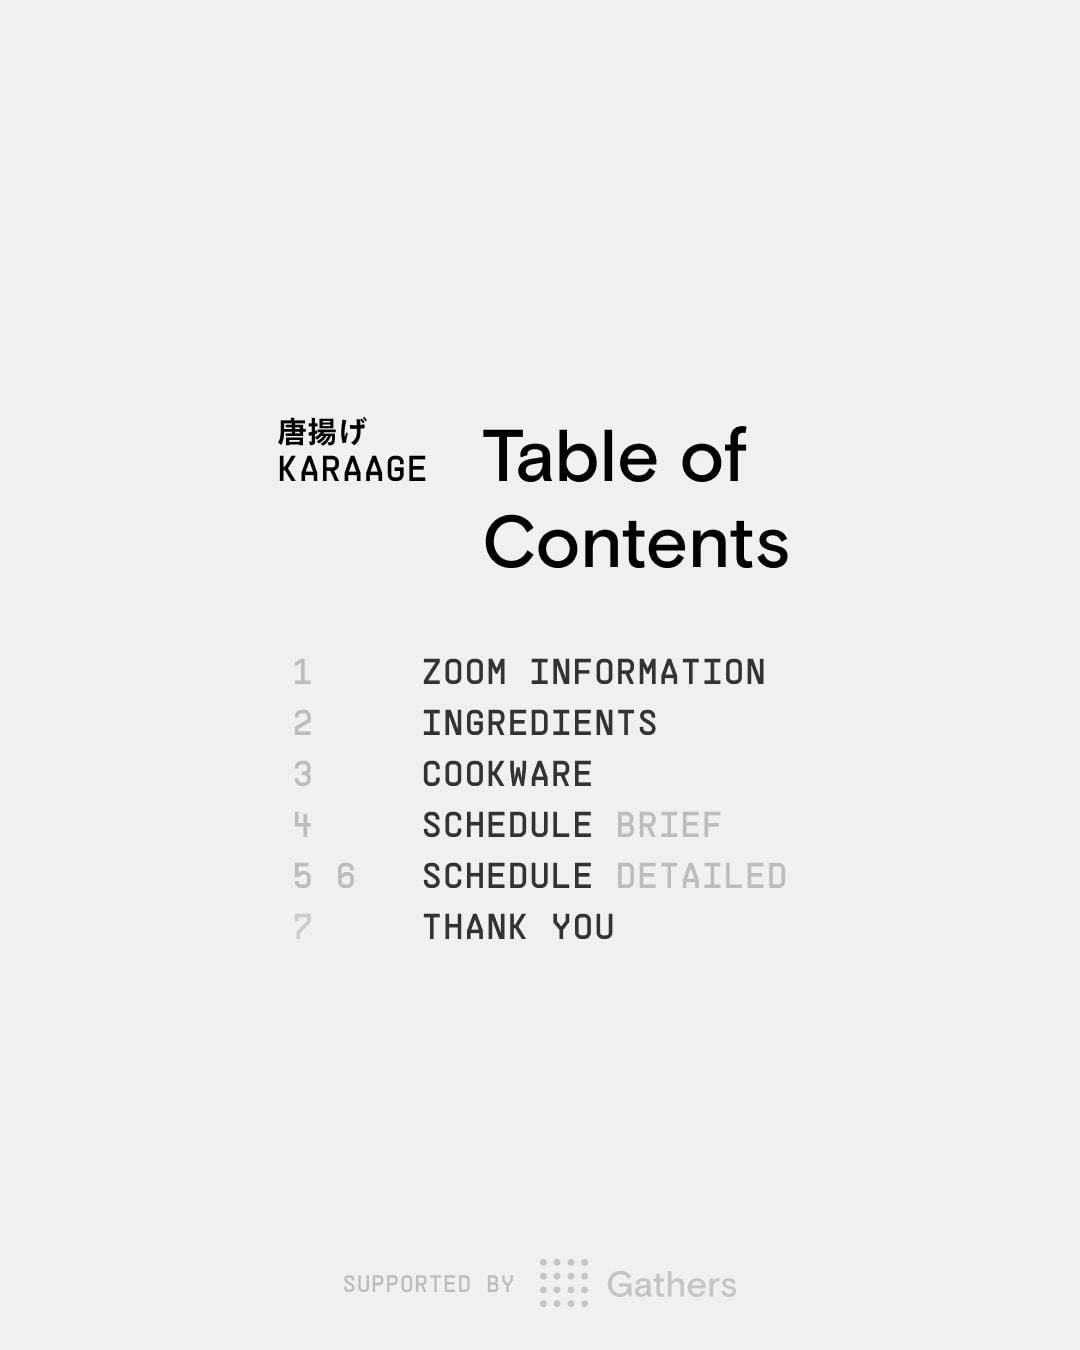 Table of contents of the booklet